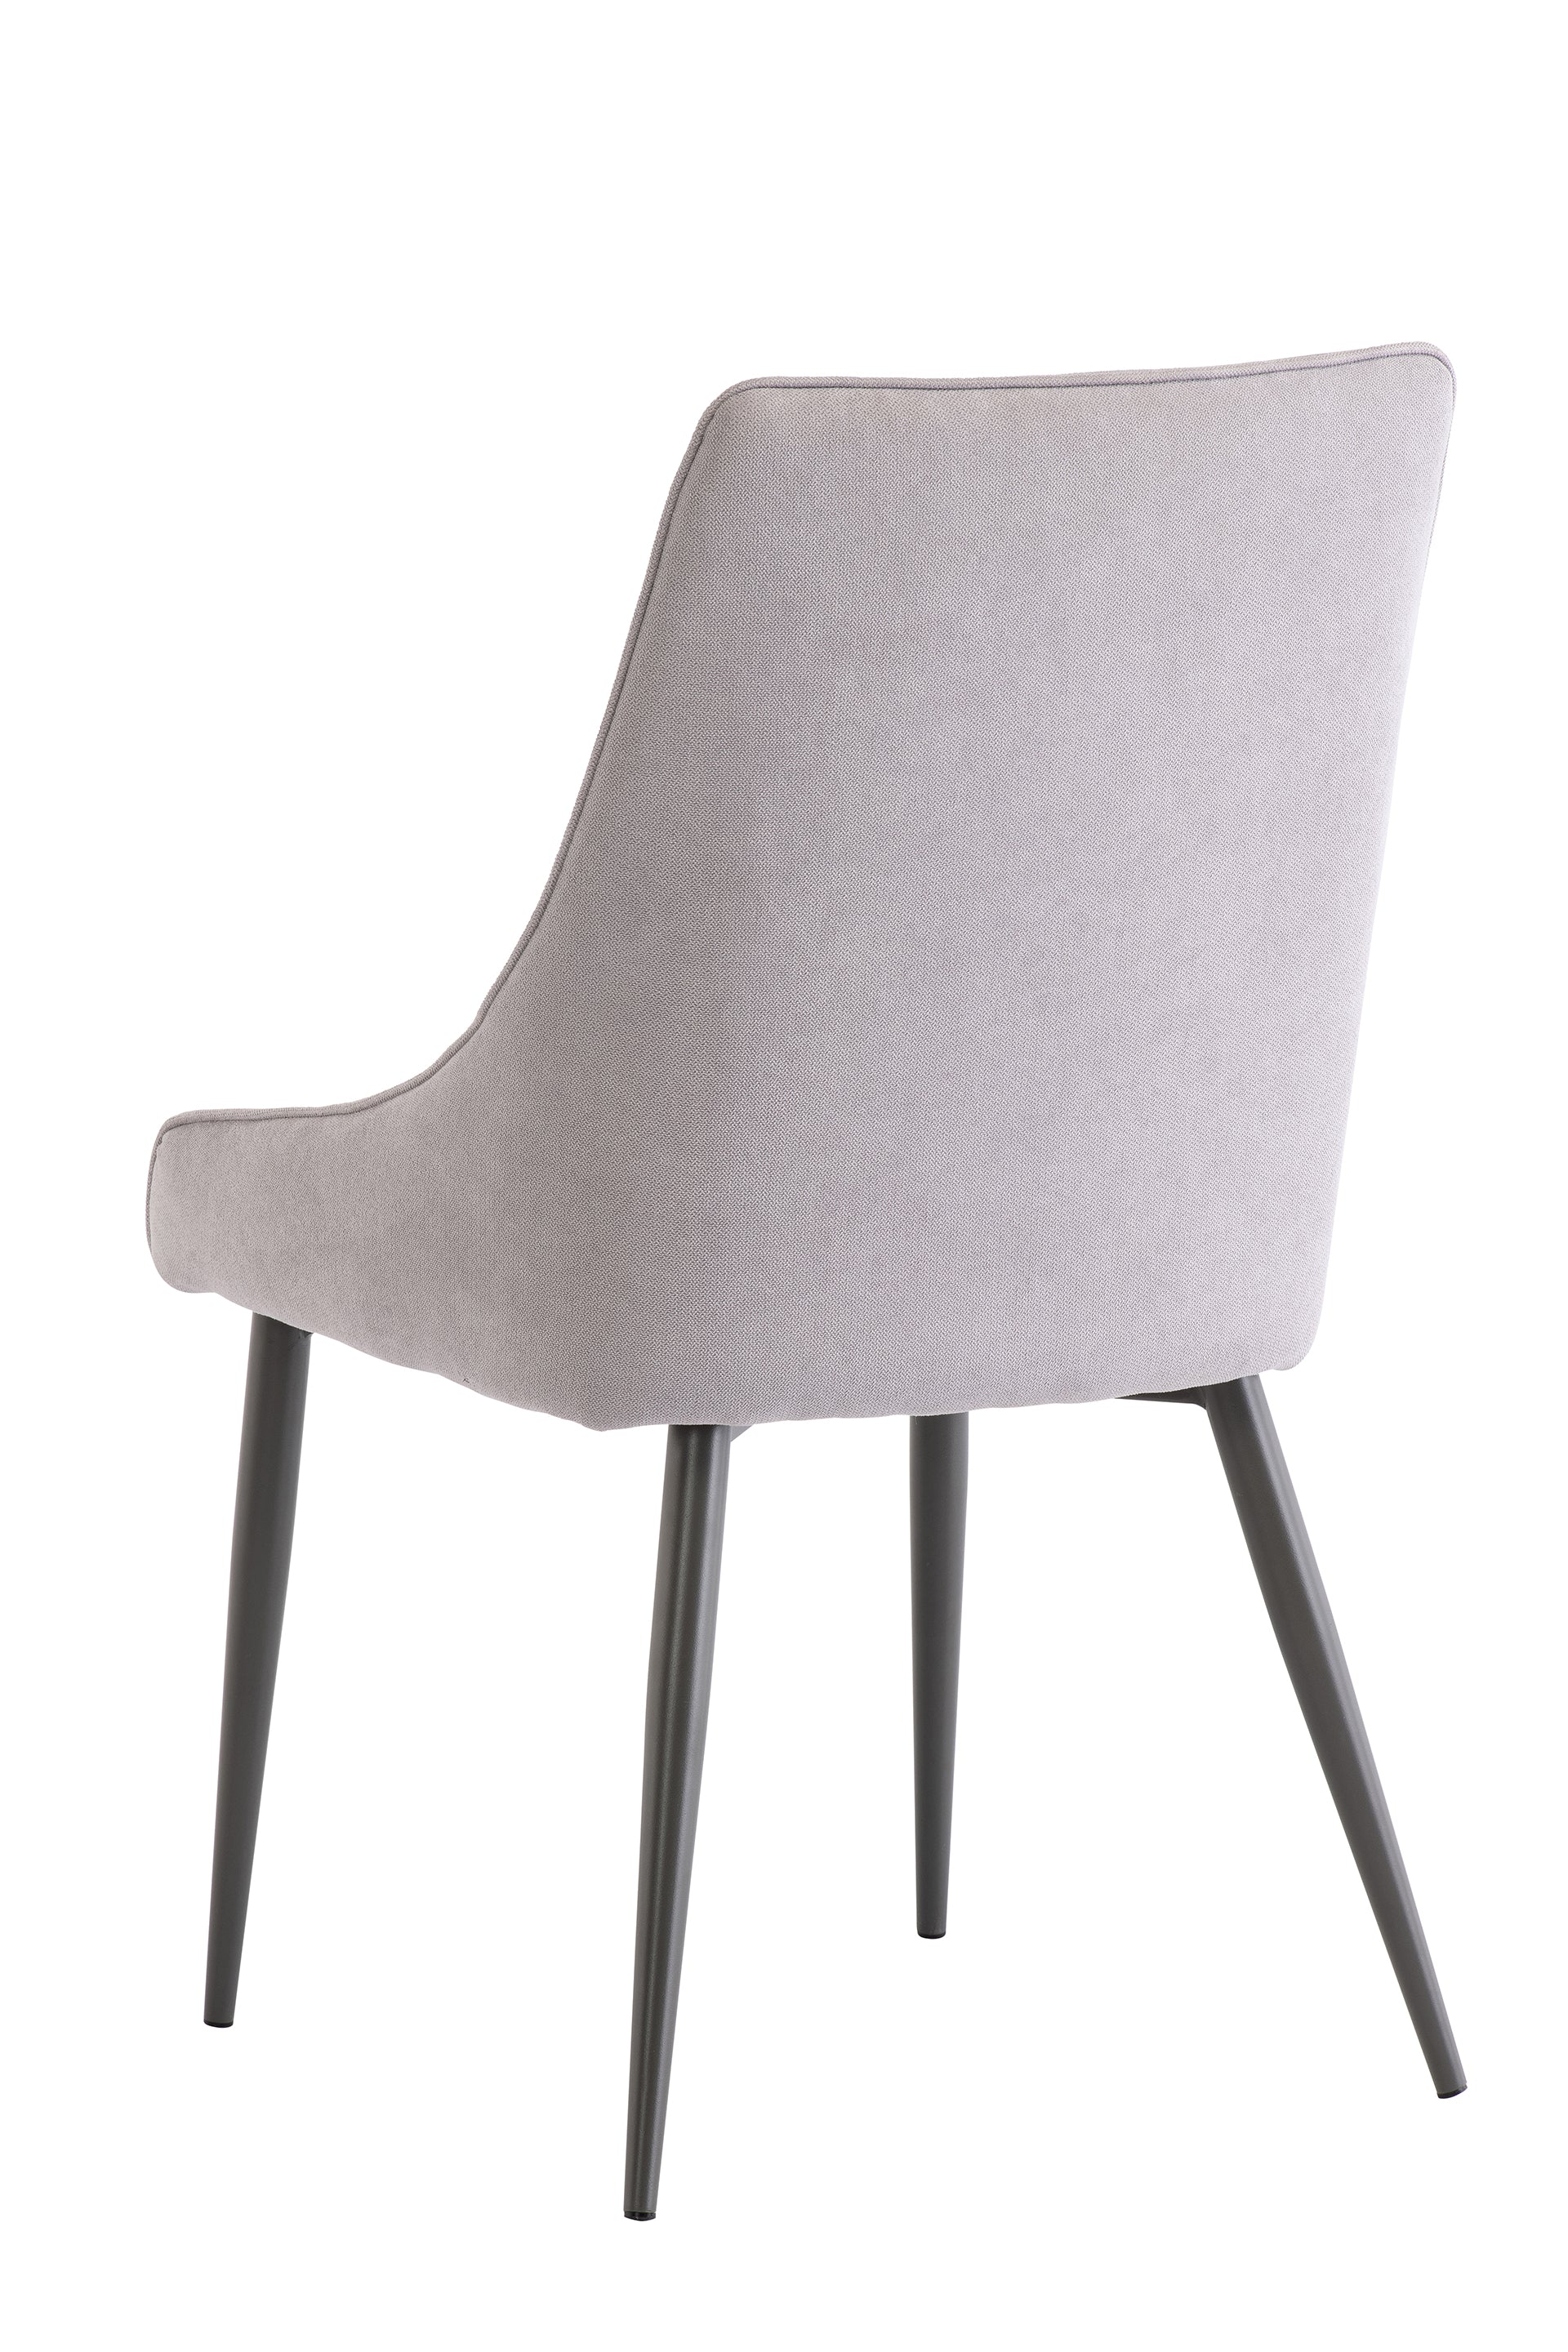 pair of dining chairs sale